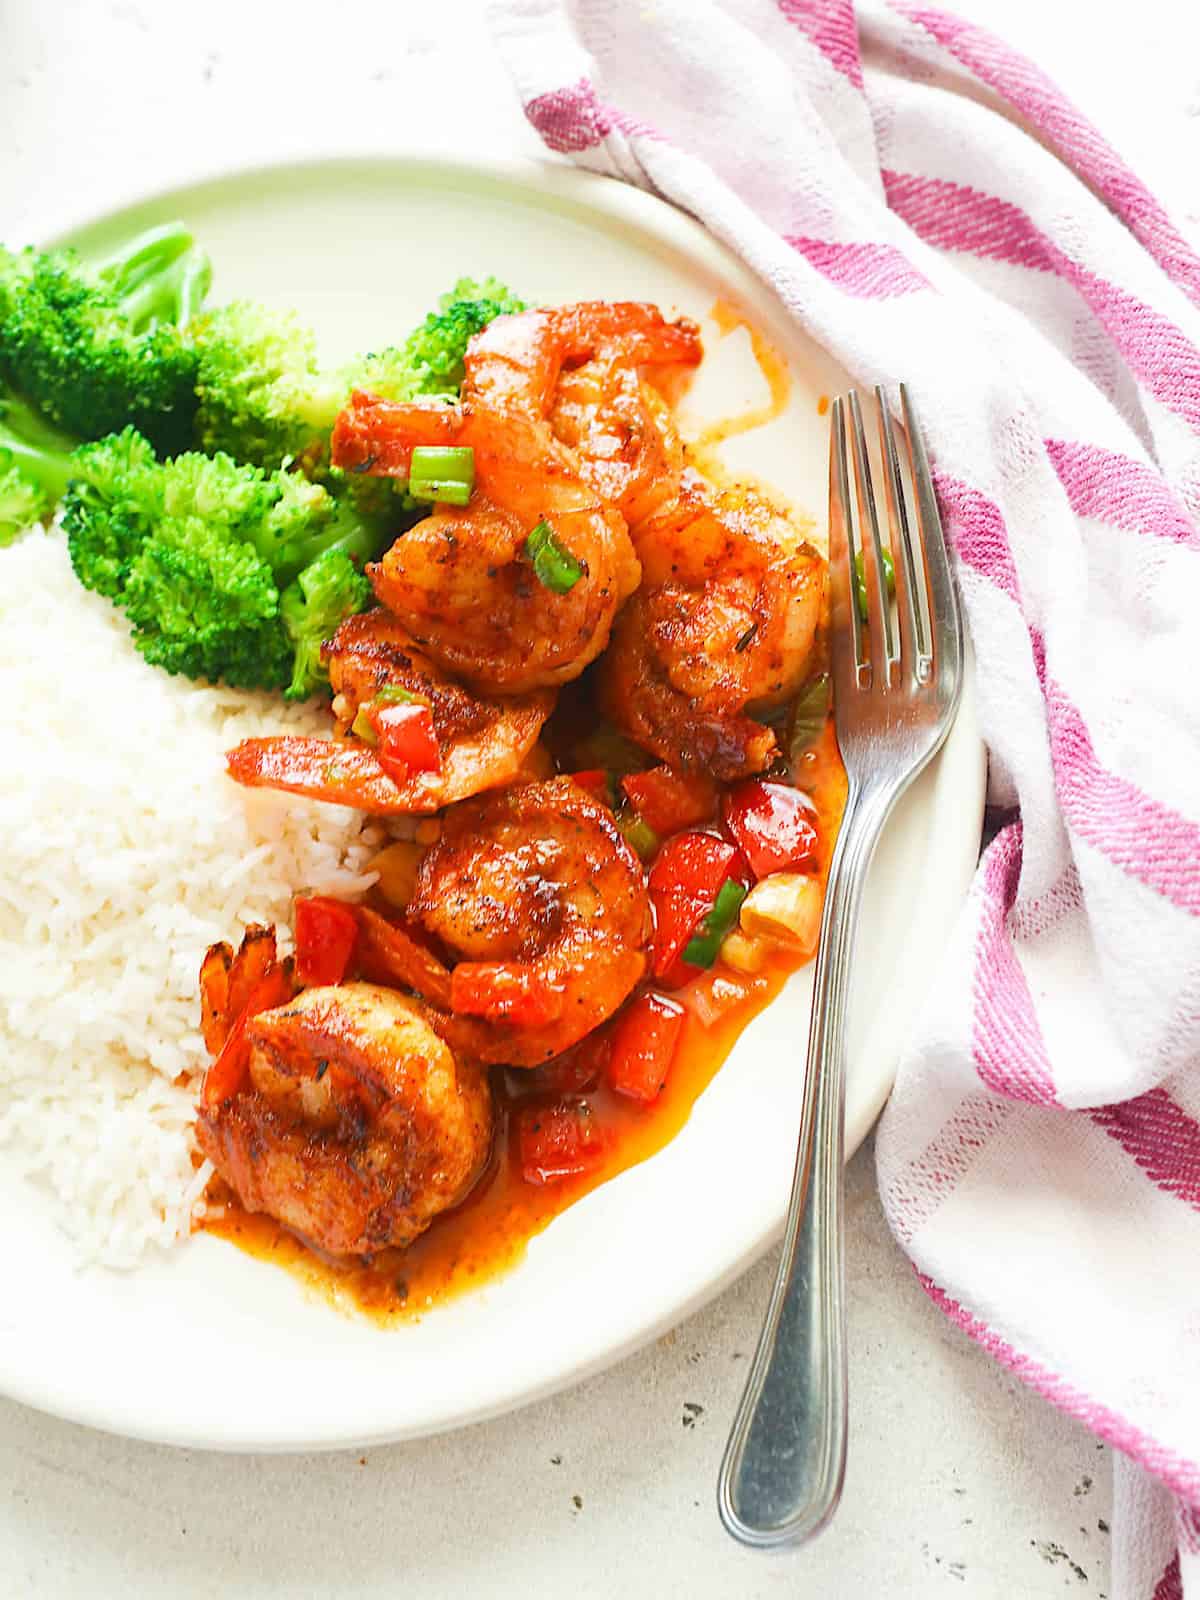 Cajun shrimp served with rice and blanched broccoli